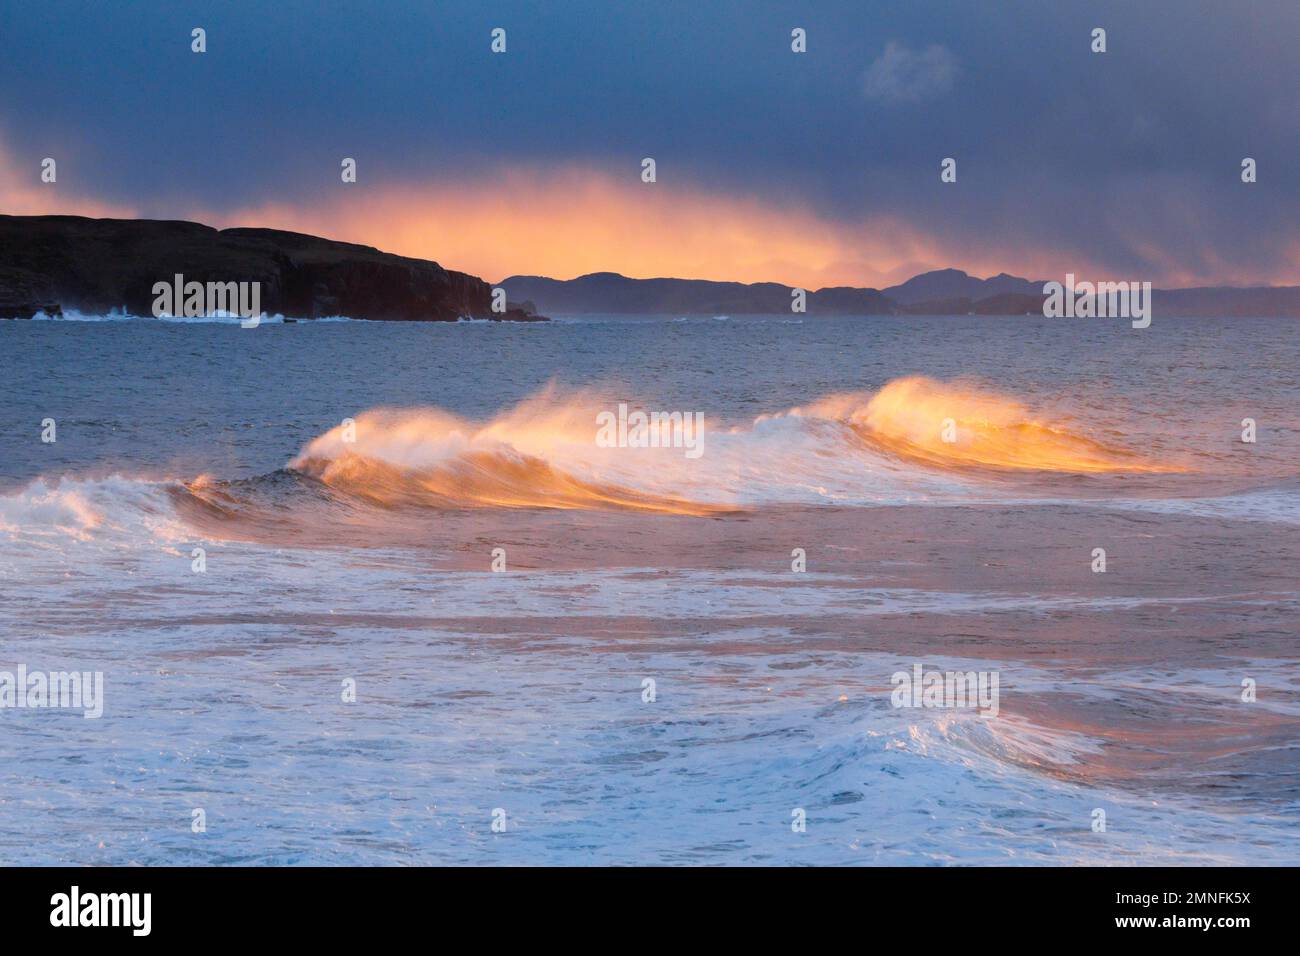 Large waves crash in a winter storm and the swirling spray is illuminated by the warm light of the evening sun, Summer Isles in the background, at Stock Photo